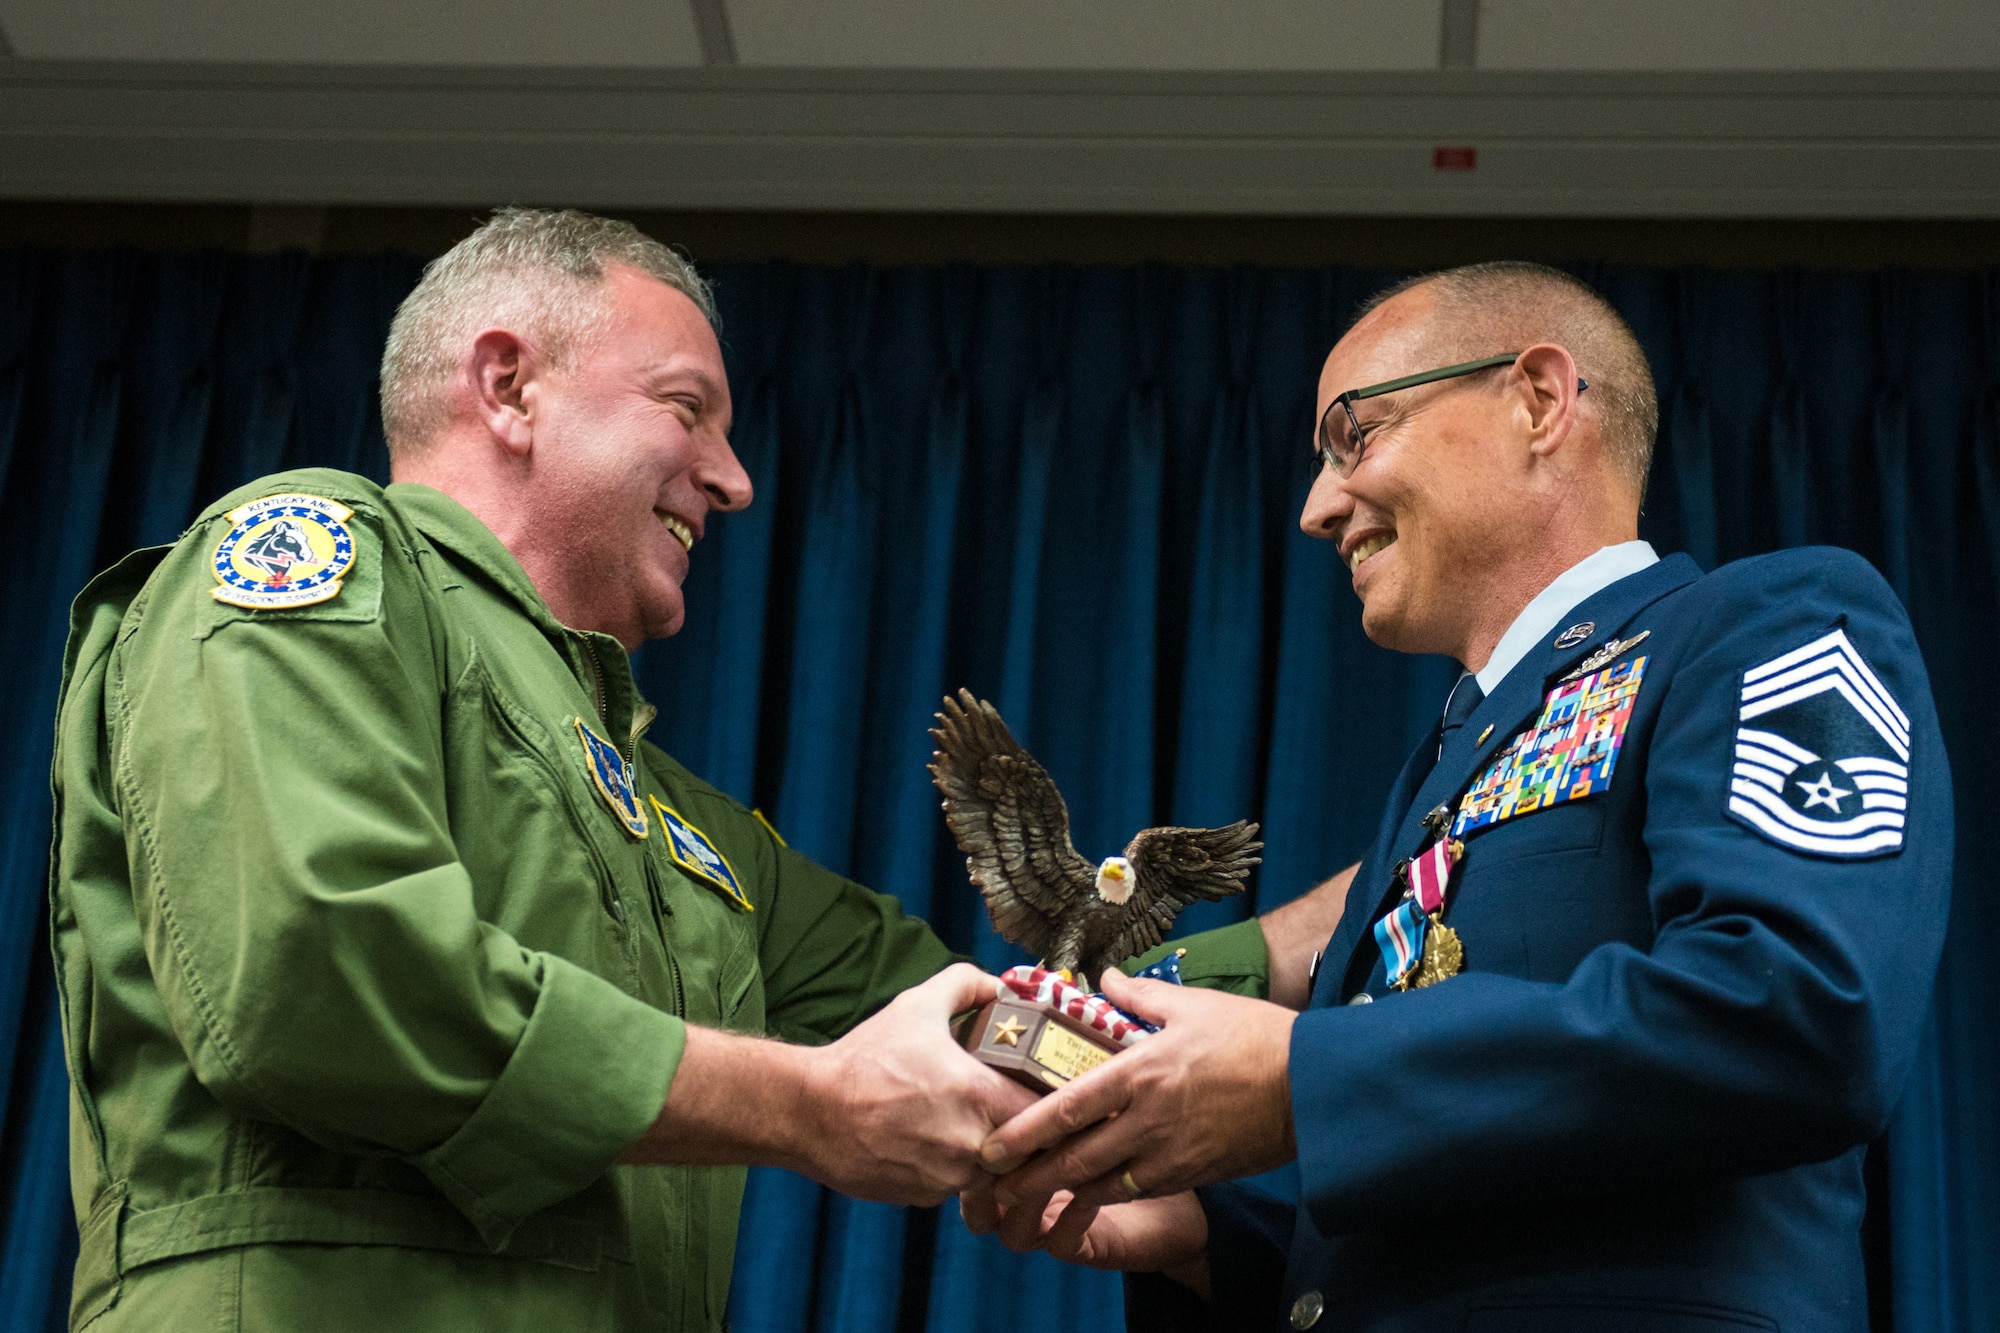 Chief Master Sgt. Danny Gregory (left), a flight engineer with the 165th Airlift Squadron, presents Chief Master Sgt. Jeffrey Brown, a loadmaster supervisor with the 165th Airlift Squadron, with a memento of appreciation during Brown's retirement ceremony at the Kentucky Air National Guard Base in Louisville, Ky., Dec. 7, 2019. (U.S. Air National Guard photo by Senior Airman Chloe Ochs)